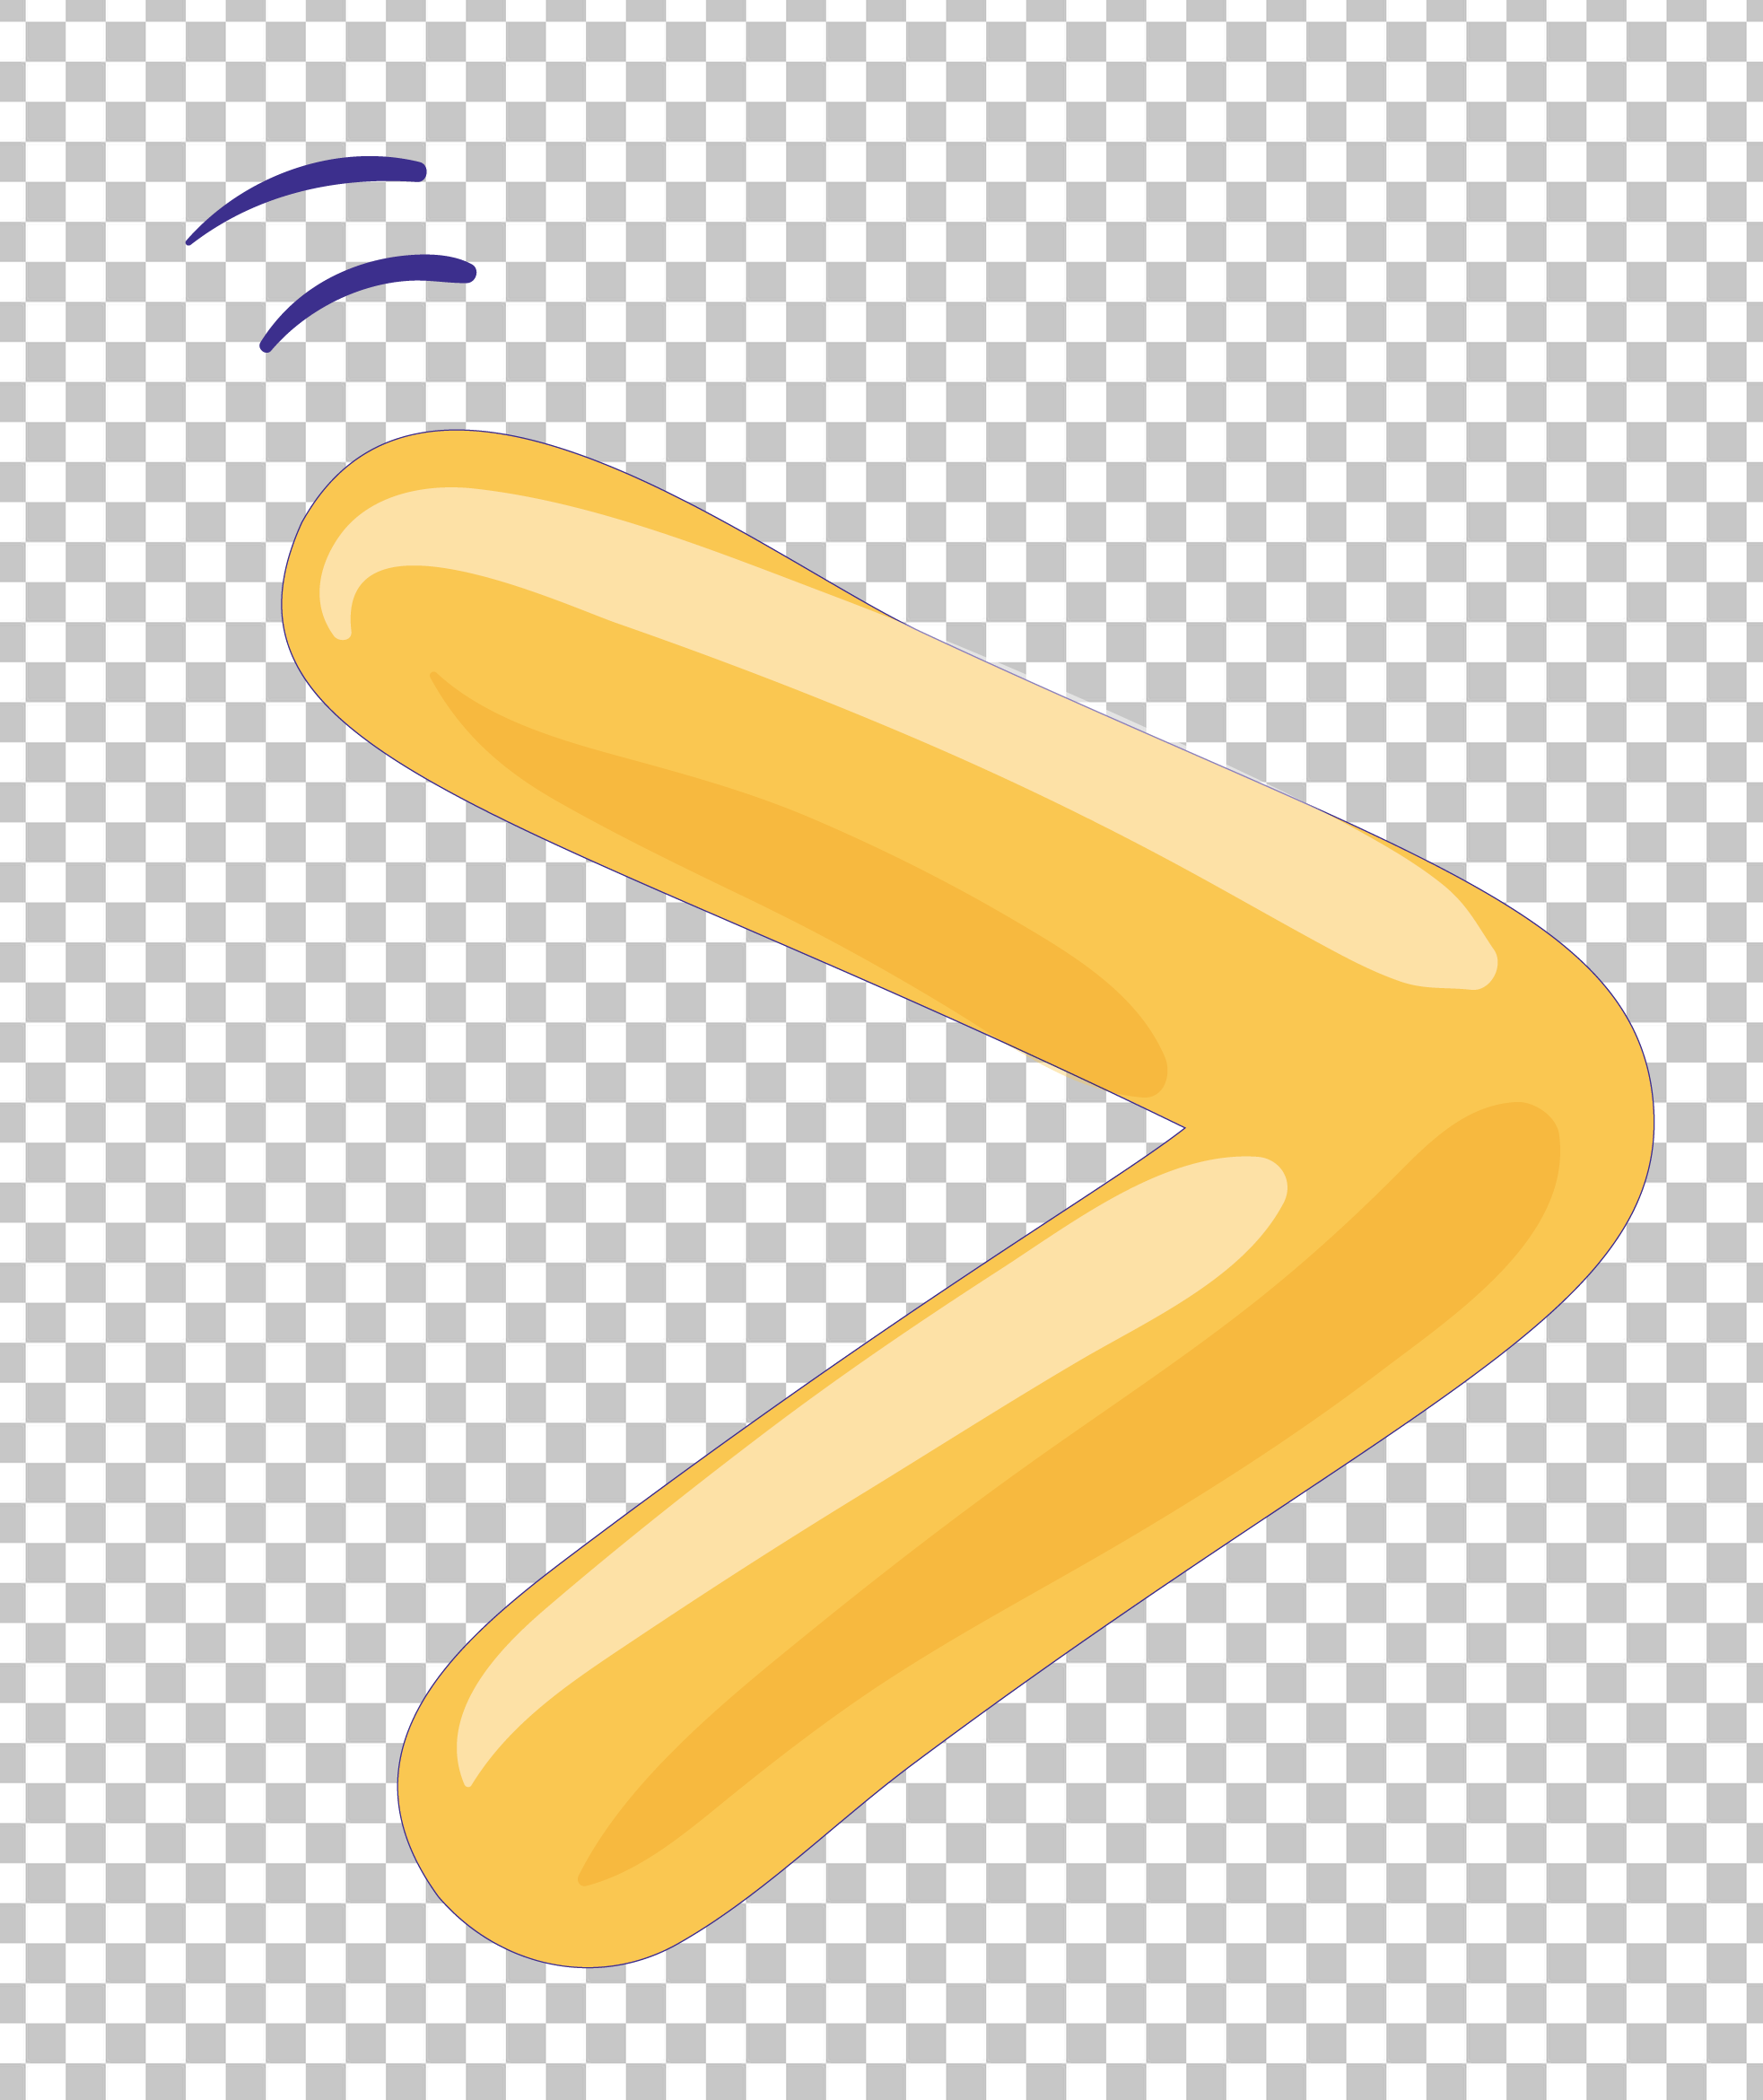 Yellow Greater Than Symbol PNG Image